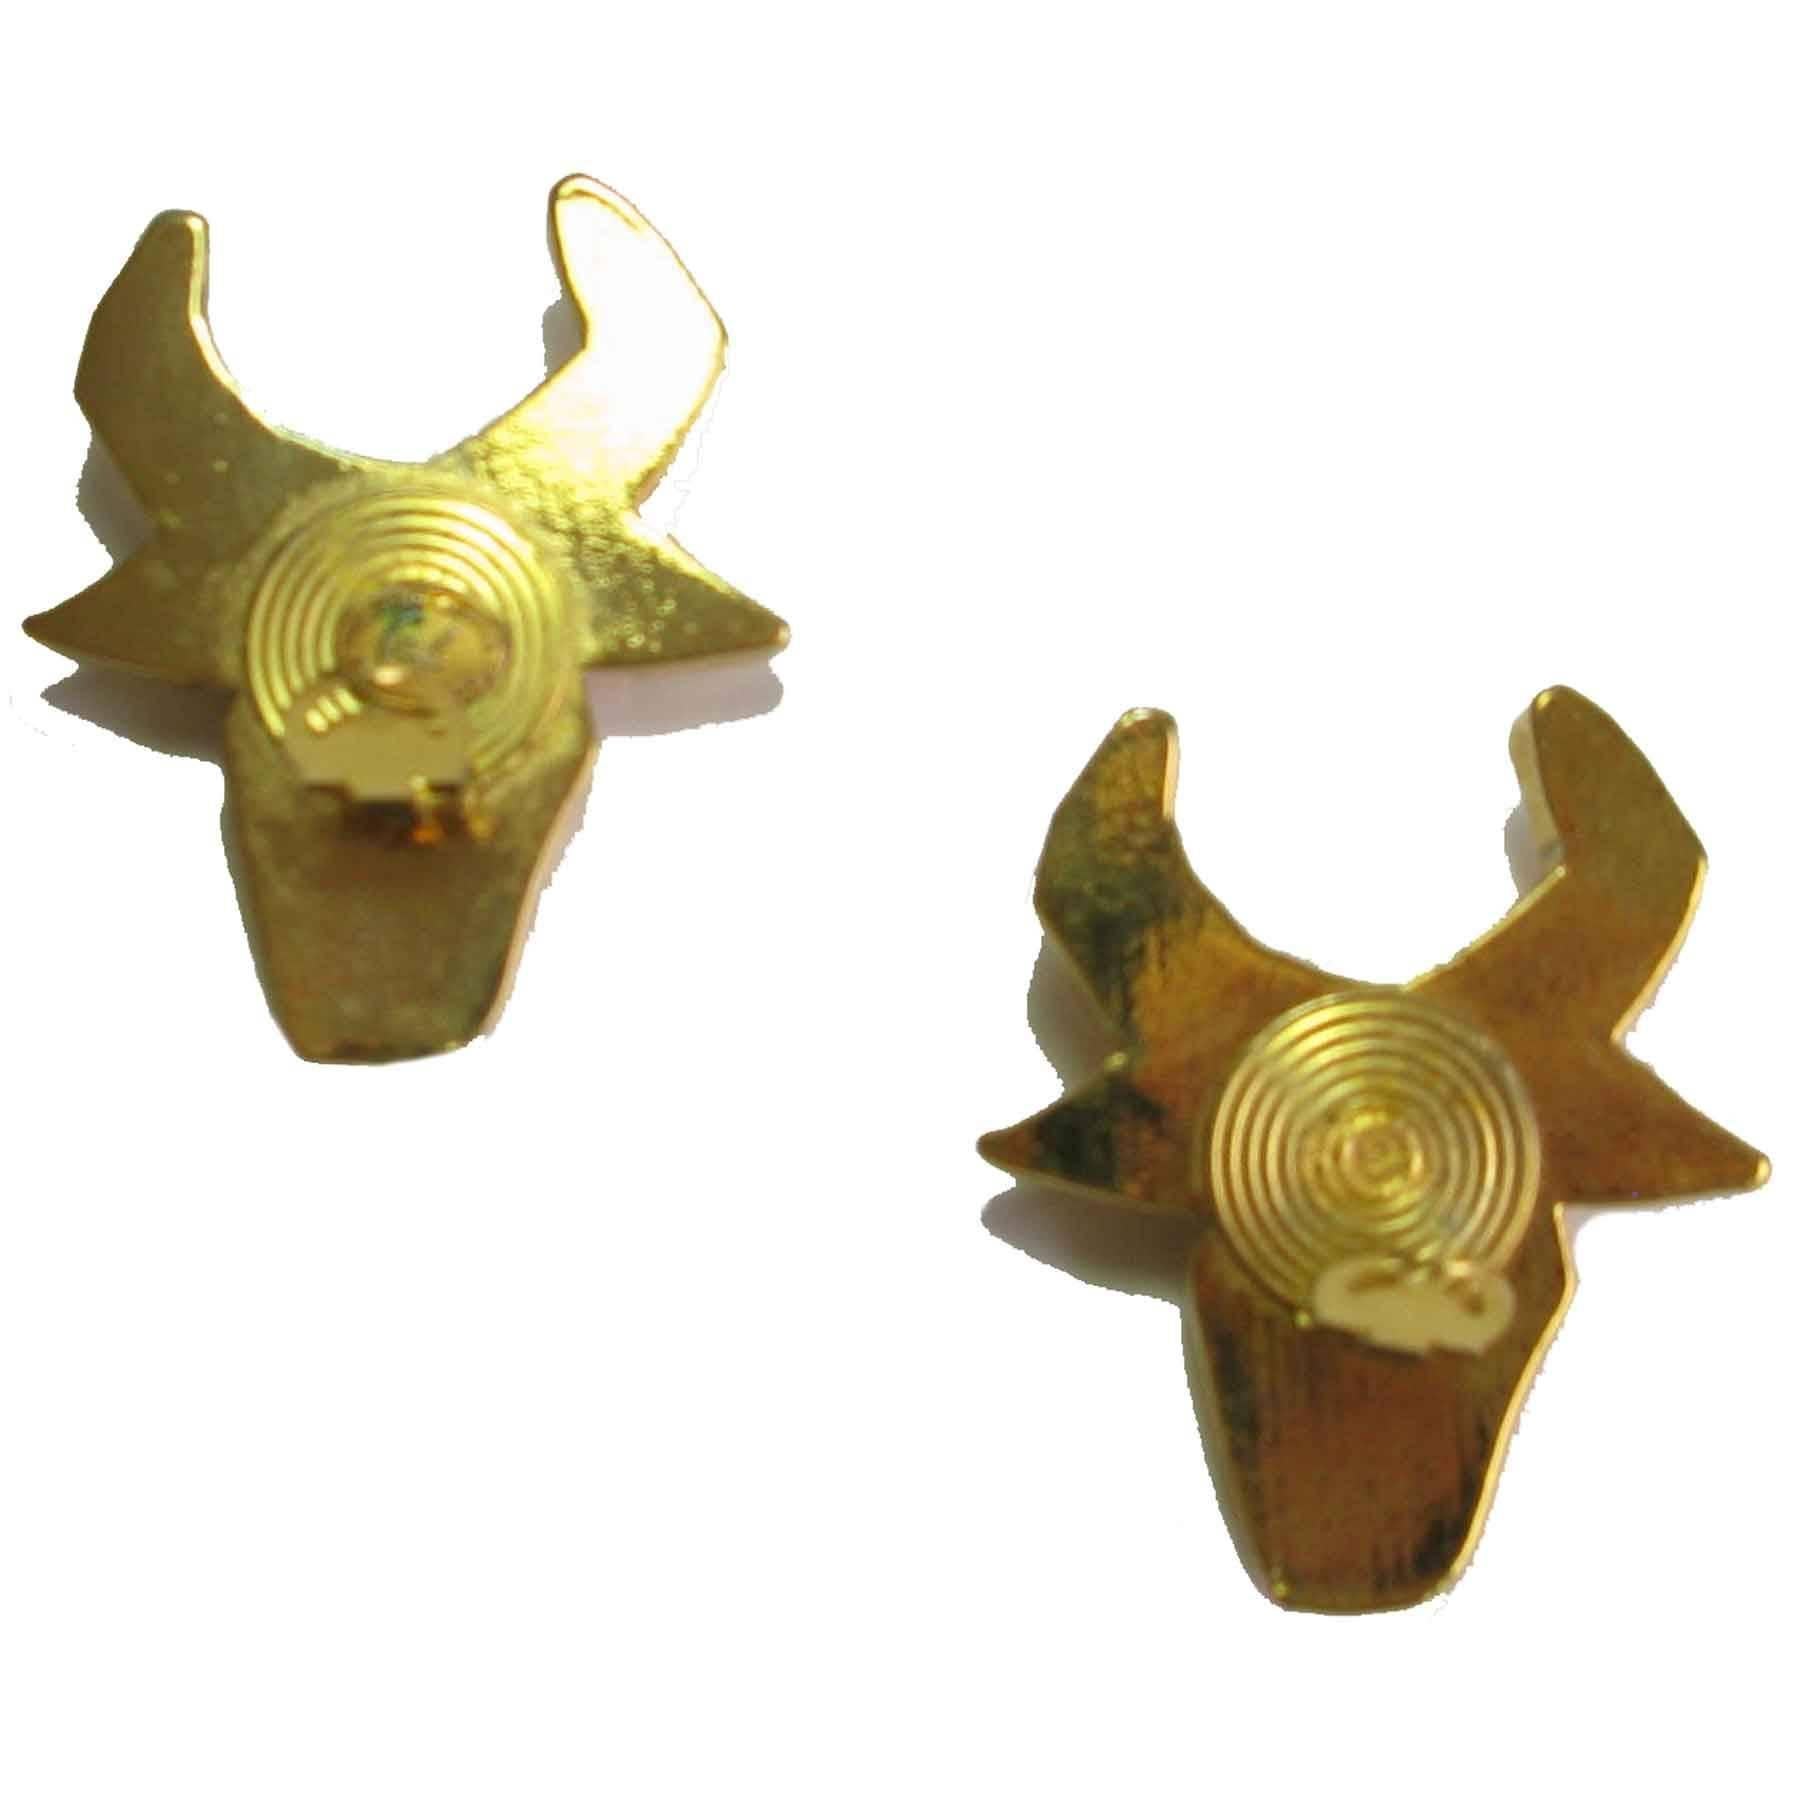 Christian Lacroix bull head clip earrings in gilt metal.
In good condition. 
Hologram of the brand is slightly oxidized.
Delivered in a Valois Vintage Paris pouch.